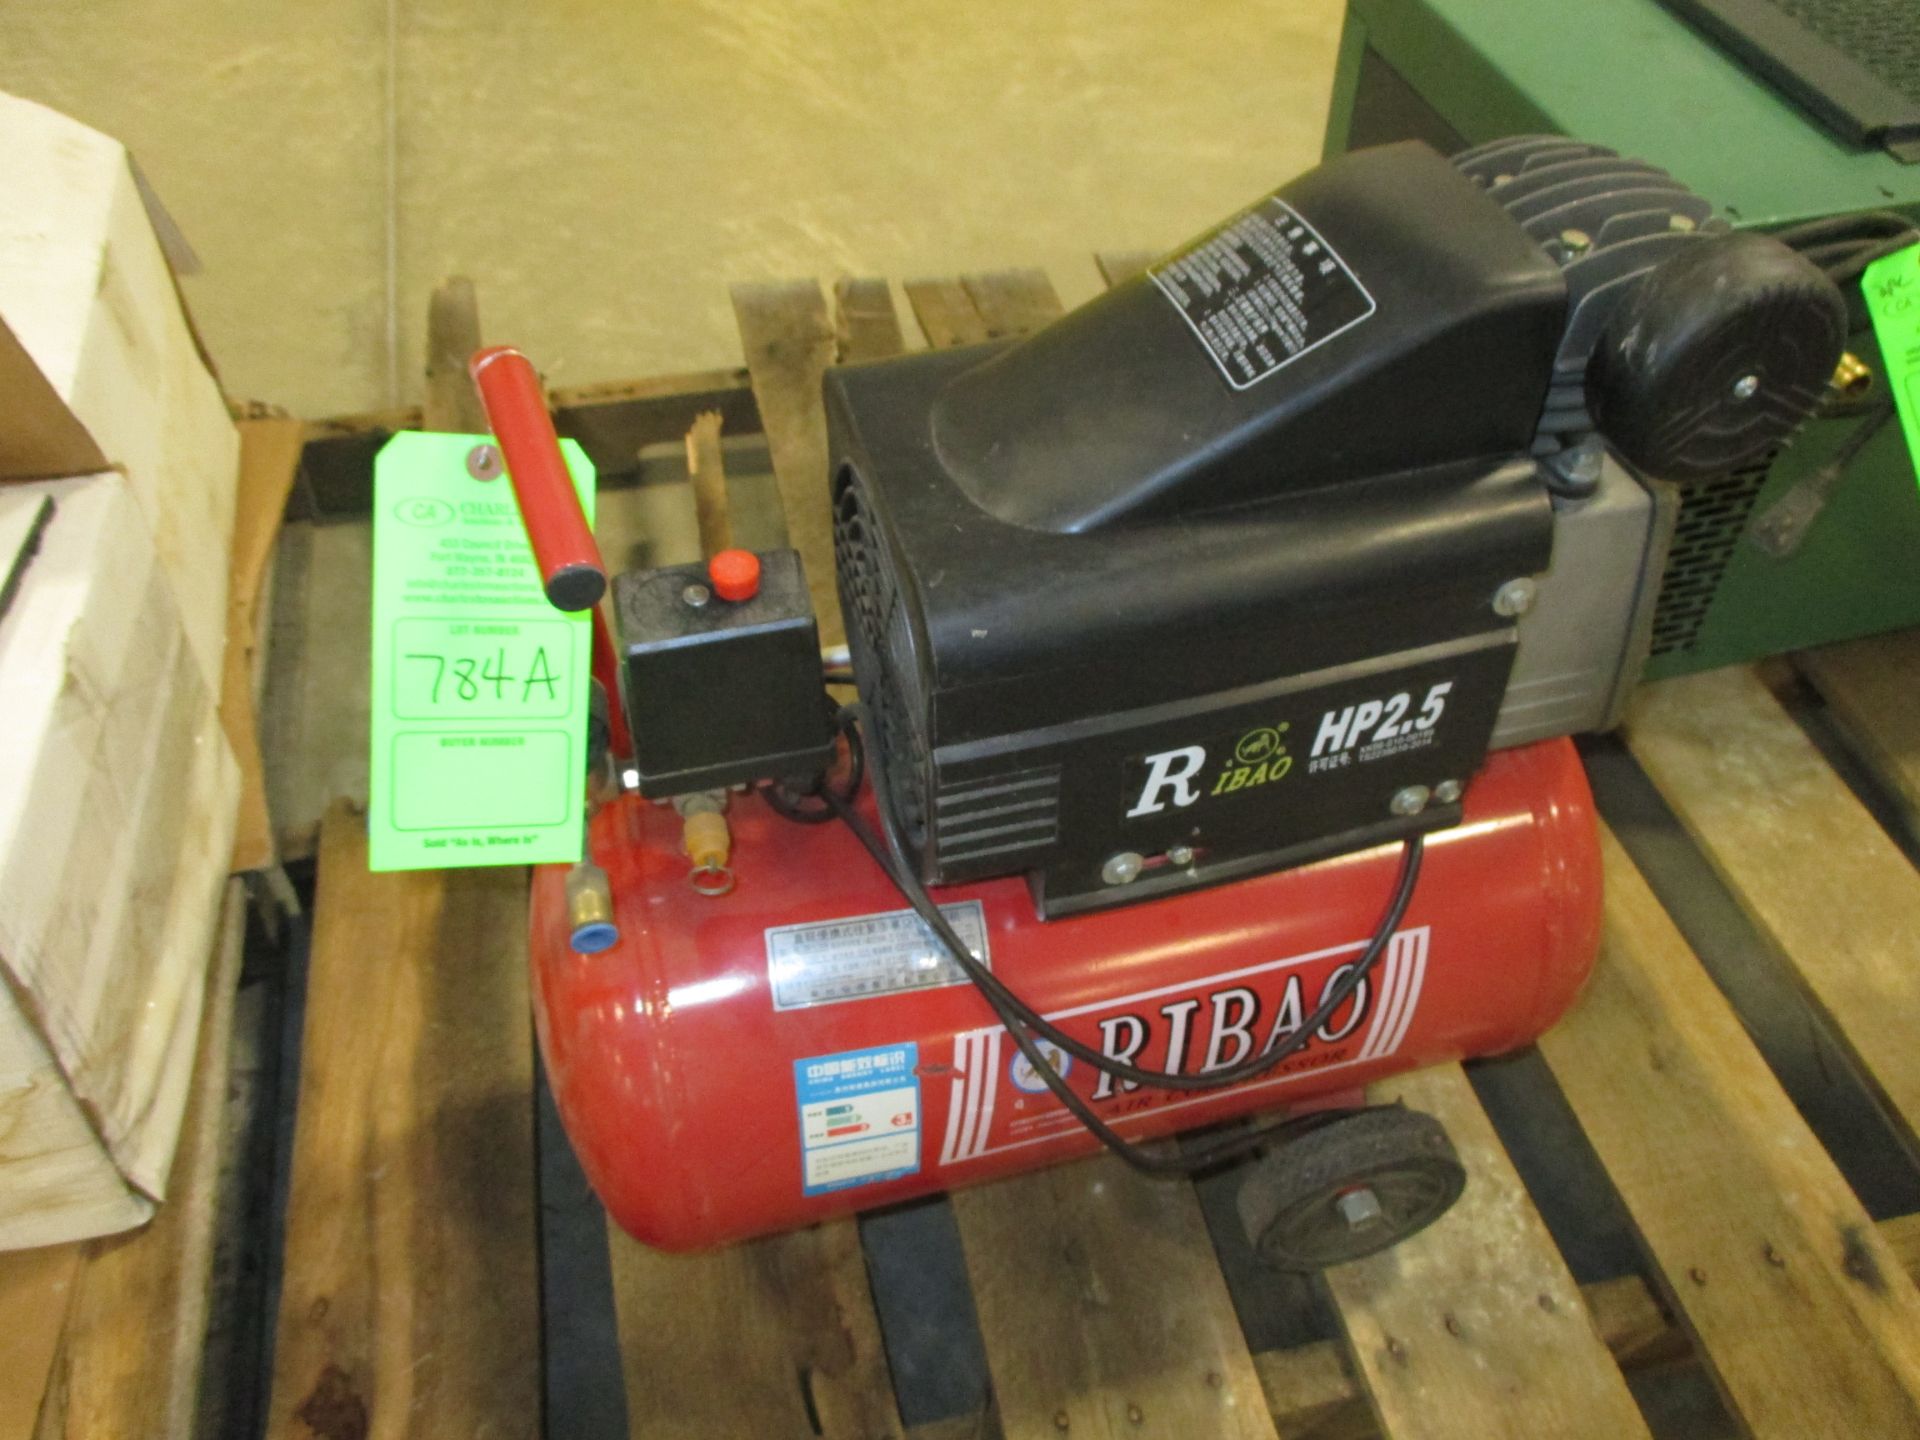 RIBAO AIR COMPRESSOR; 2.5HP(5373 STATE ROUTE 29 CELINA OH 45822-9210)